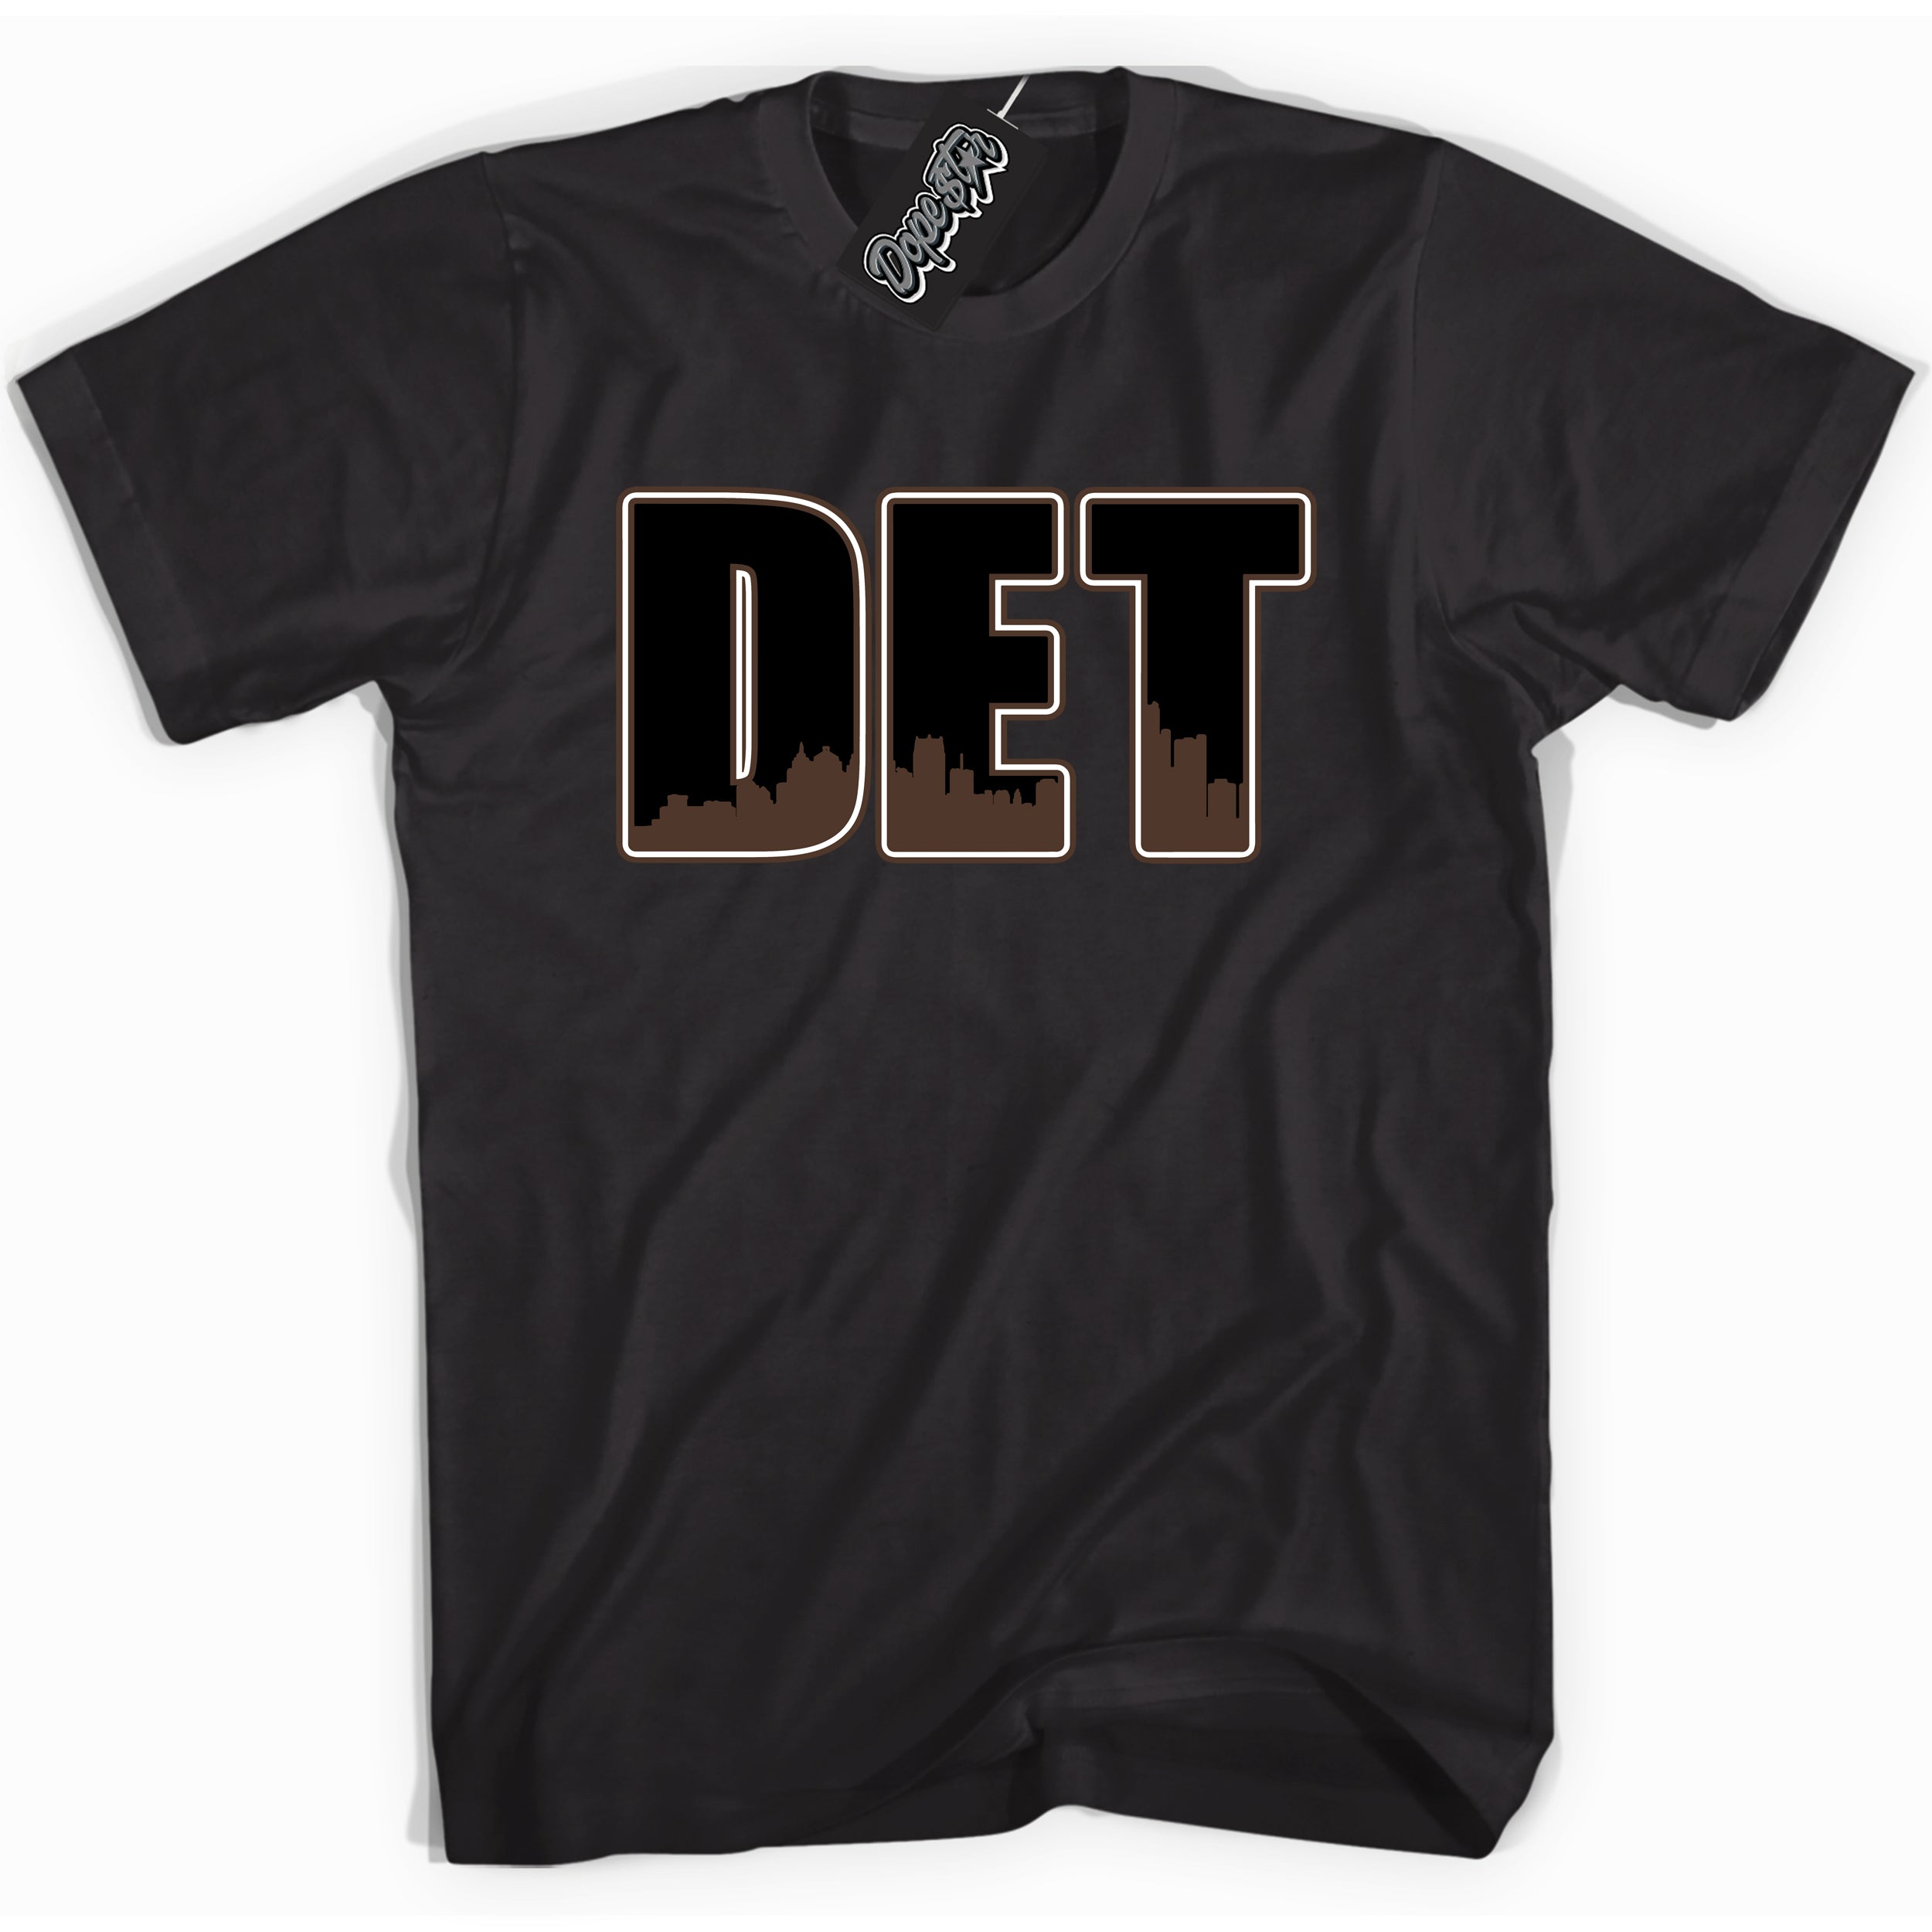 Cool Black graphic tee with “ Detroit ” design, that perfectly matches Palomino 1s sneakers 